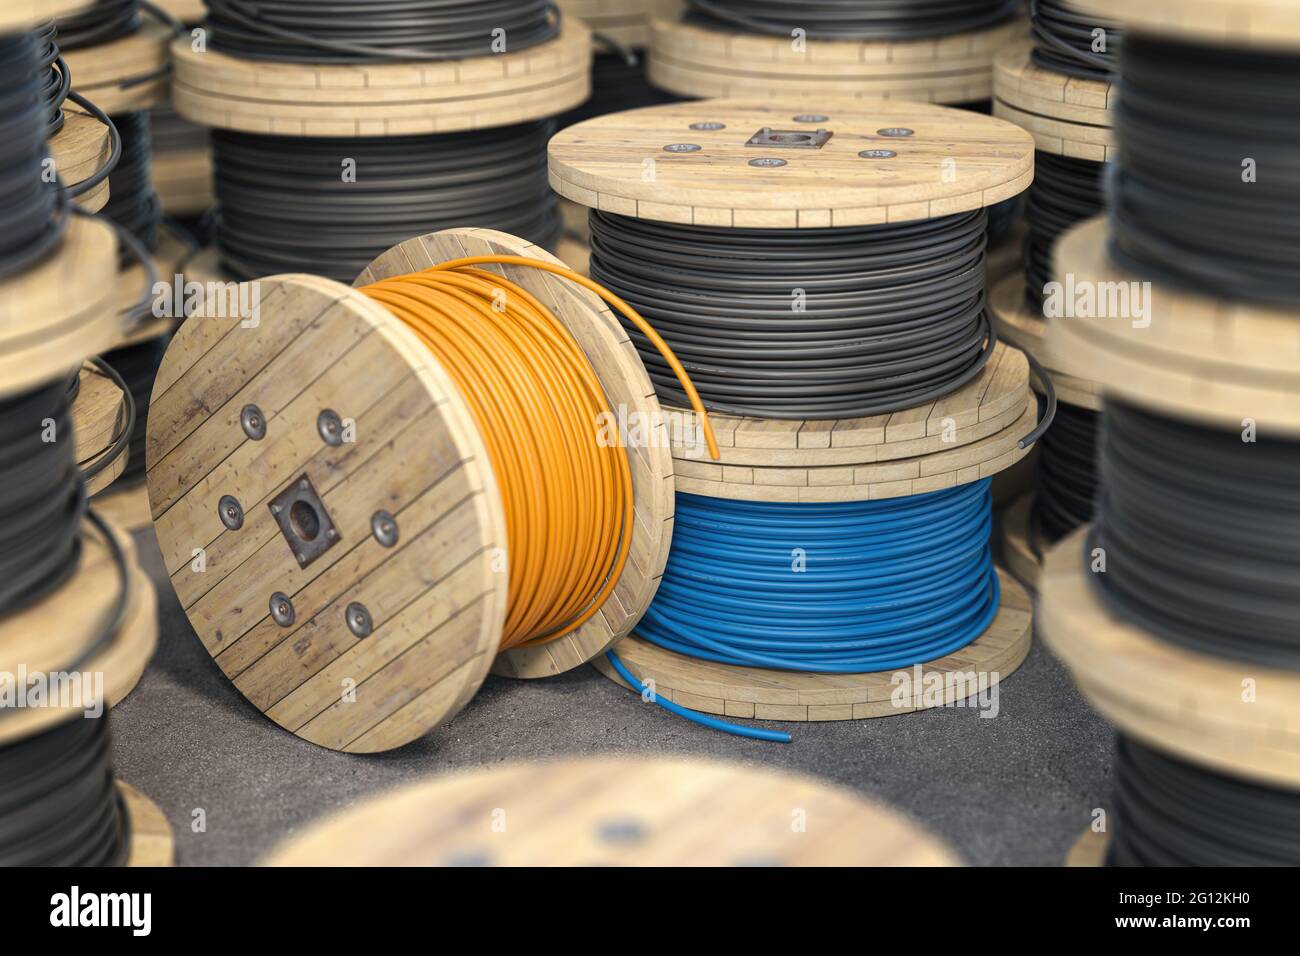 Wire electric cable on wooden coil or spool isolated on warehouse. 3d illustration. Stock Photo